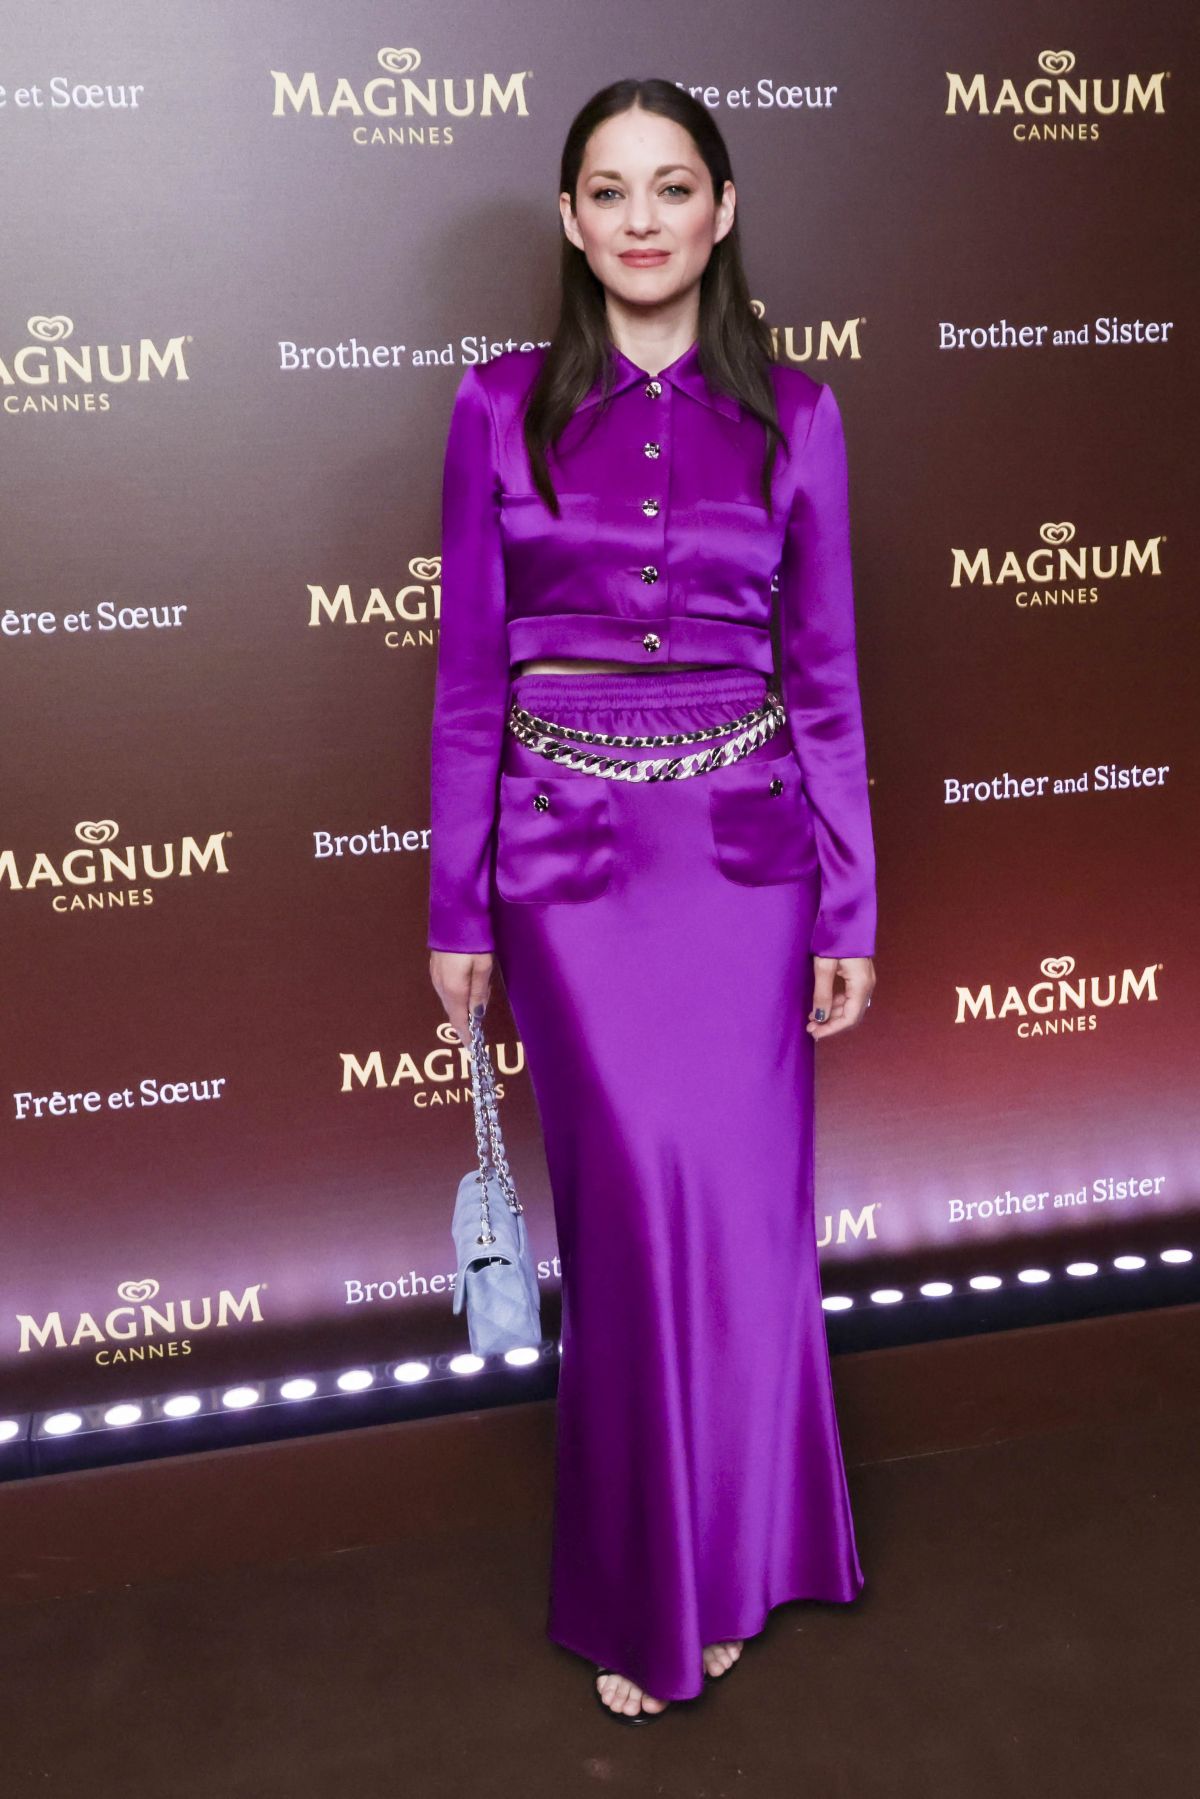 marion-cotillard-wore-purple-chanel-outfit-evening-brother-and-sister-cannes-event